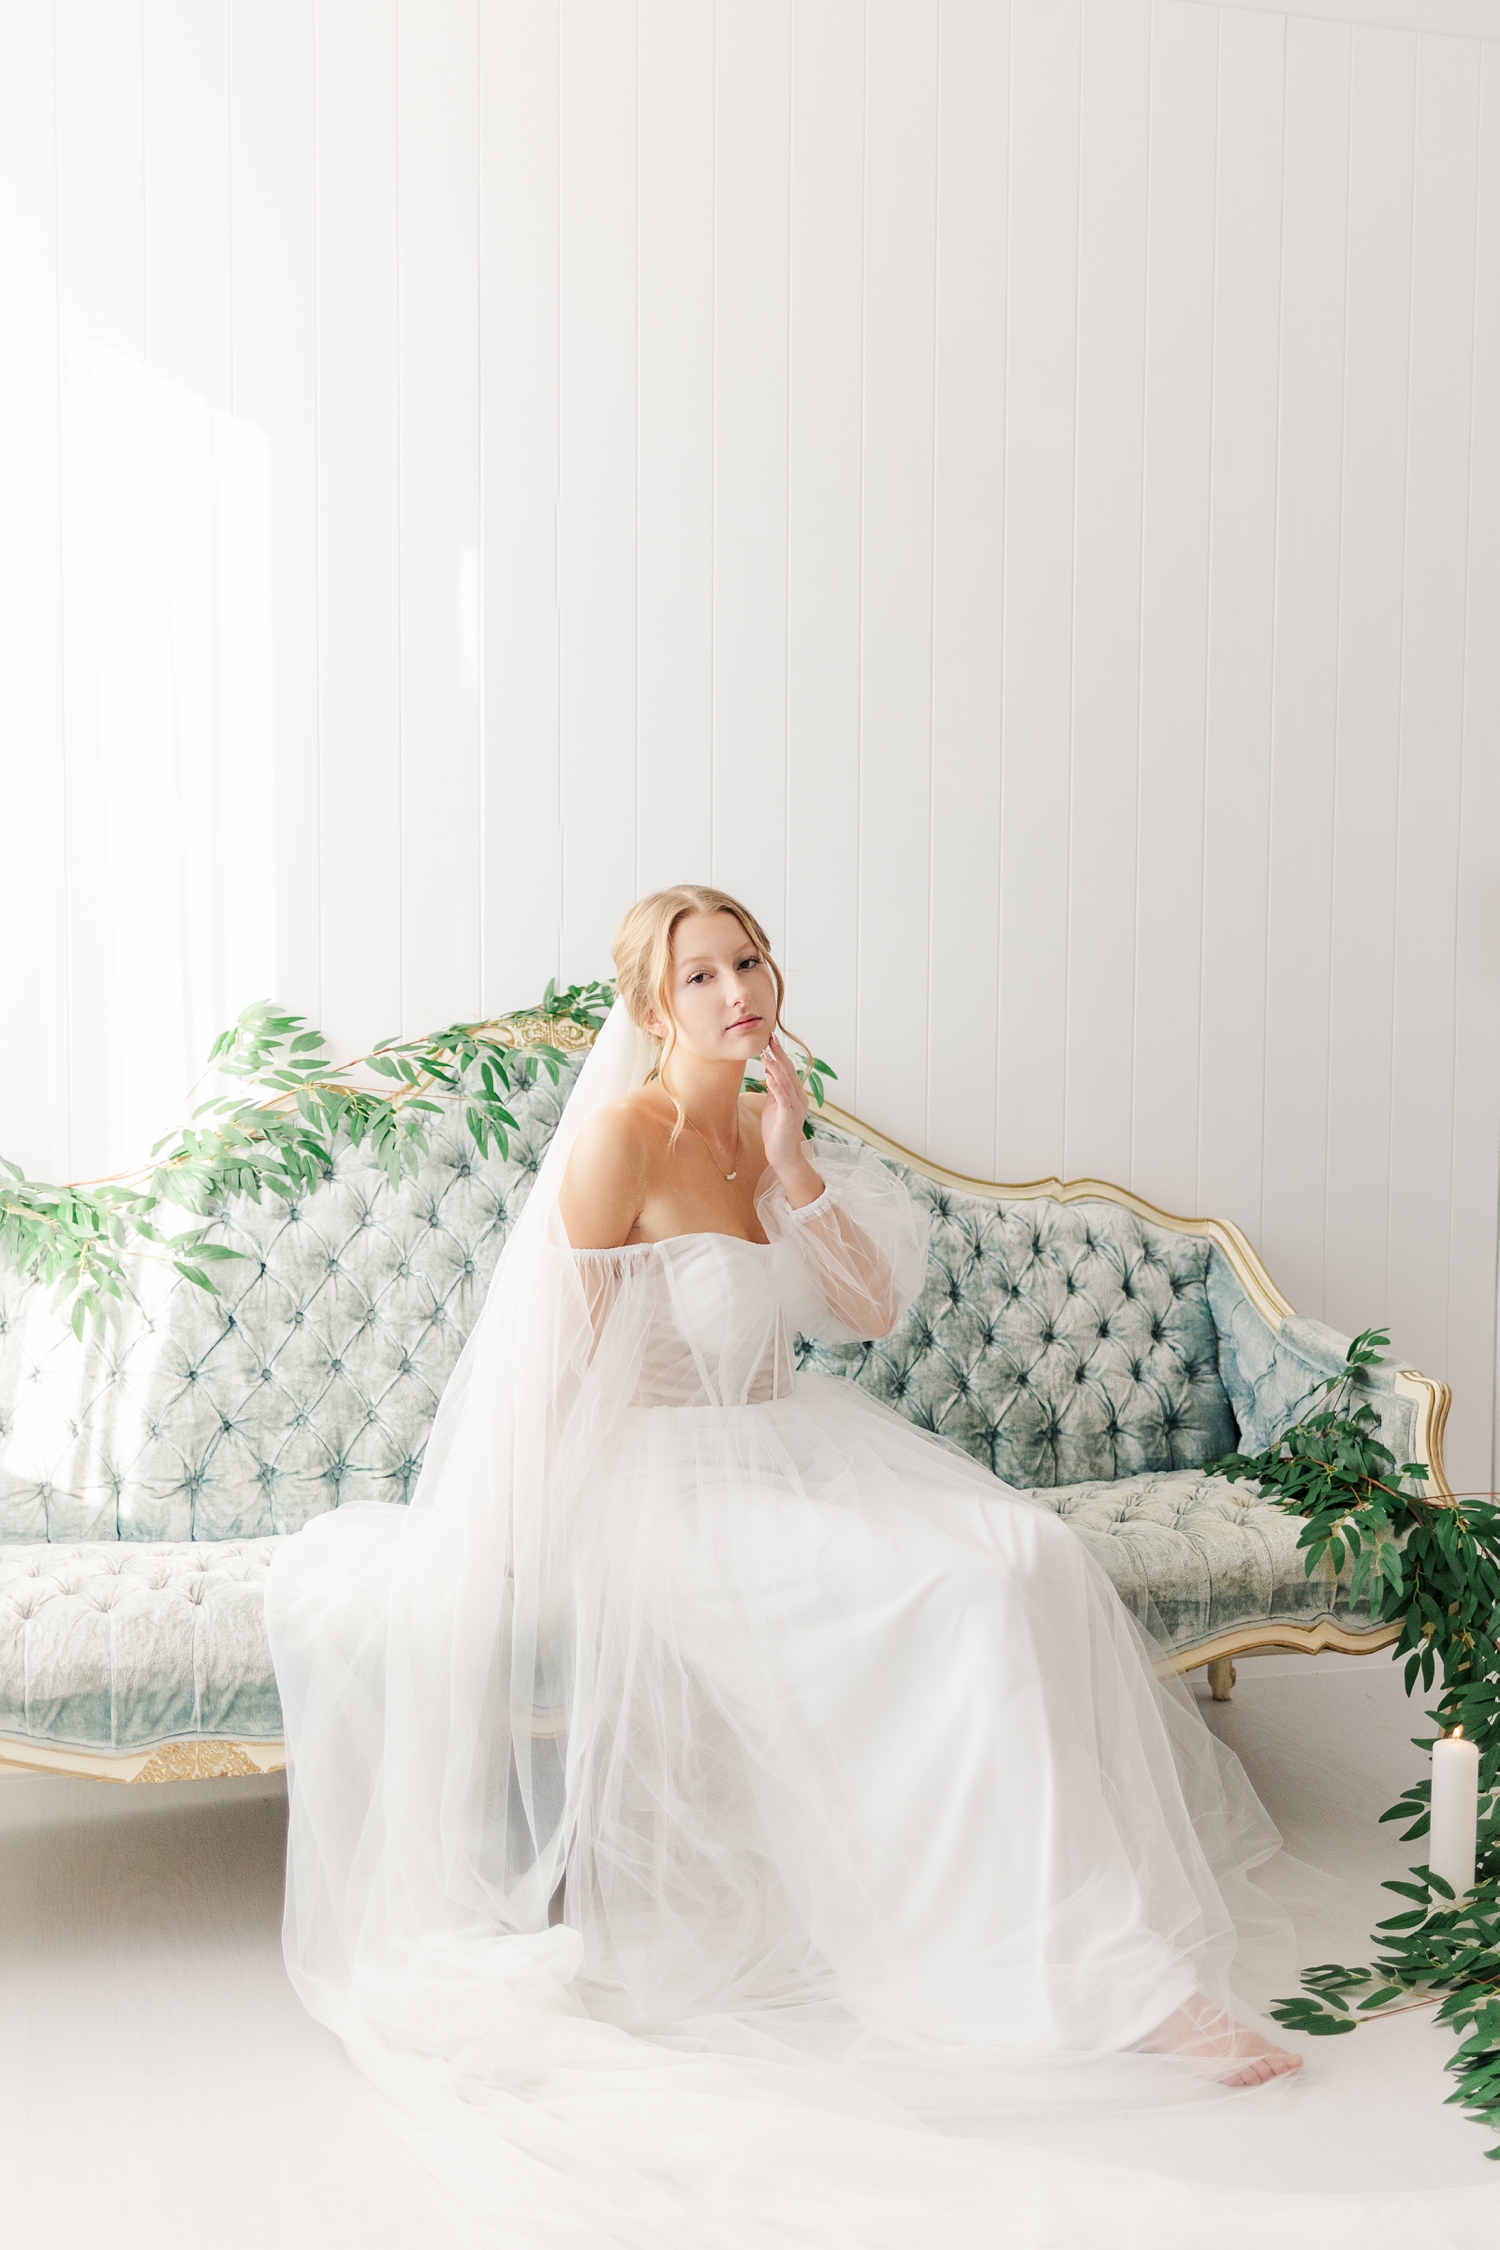 Bride, Ryley dressed in her vintage style wedding gown, gracefully sits on an antique, tufted, blue, victorian style couch draped in greenery | CB Studio